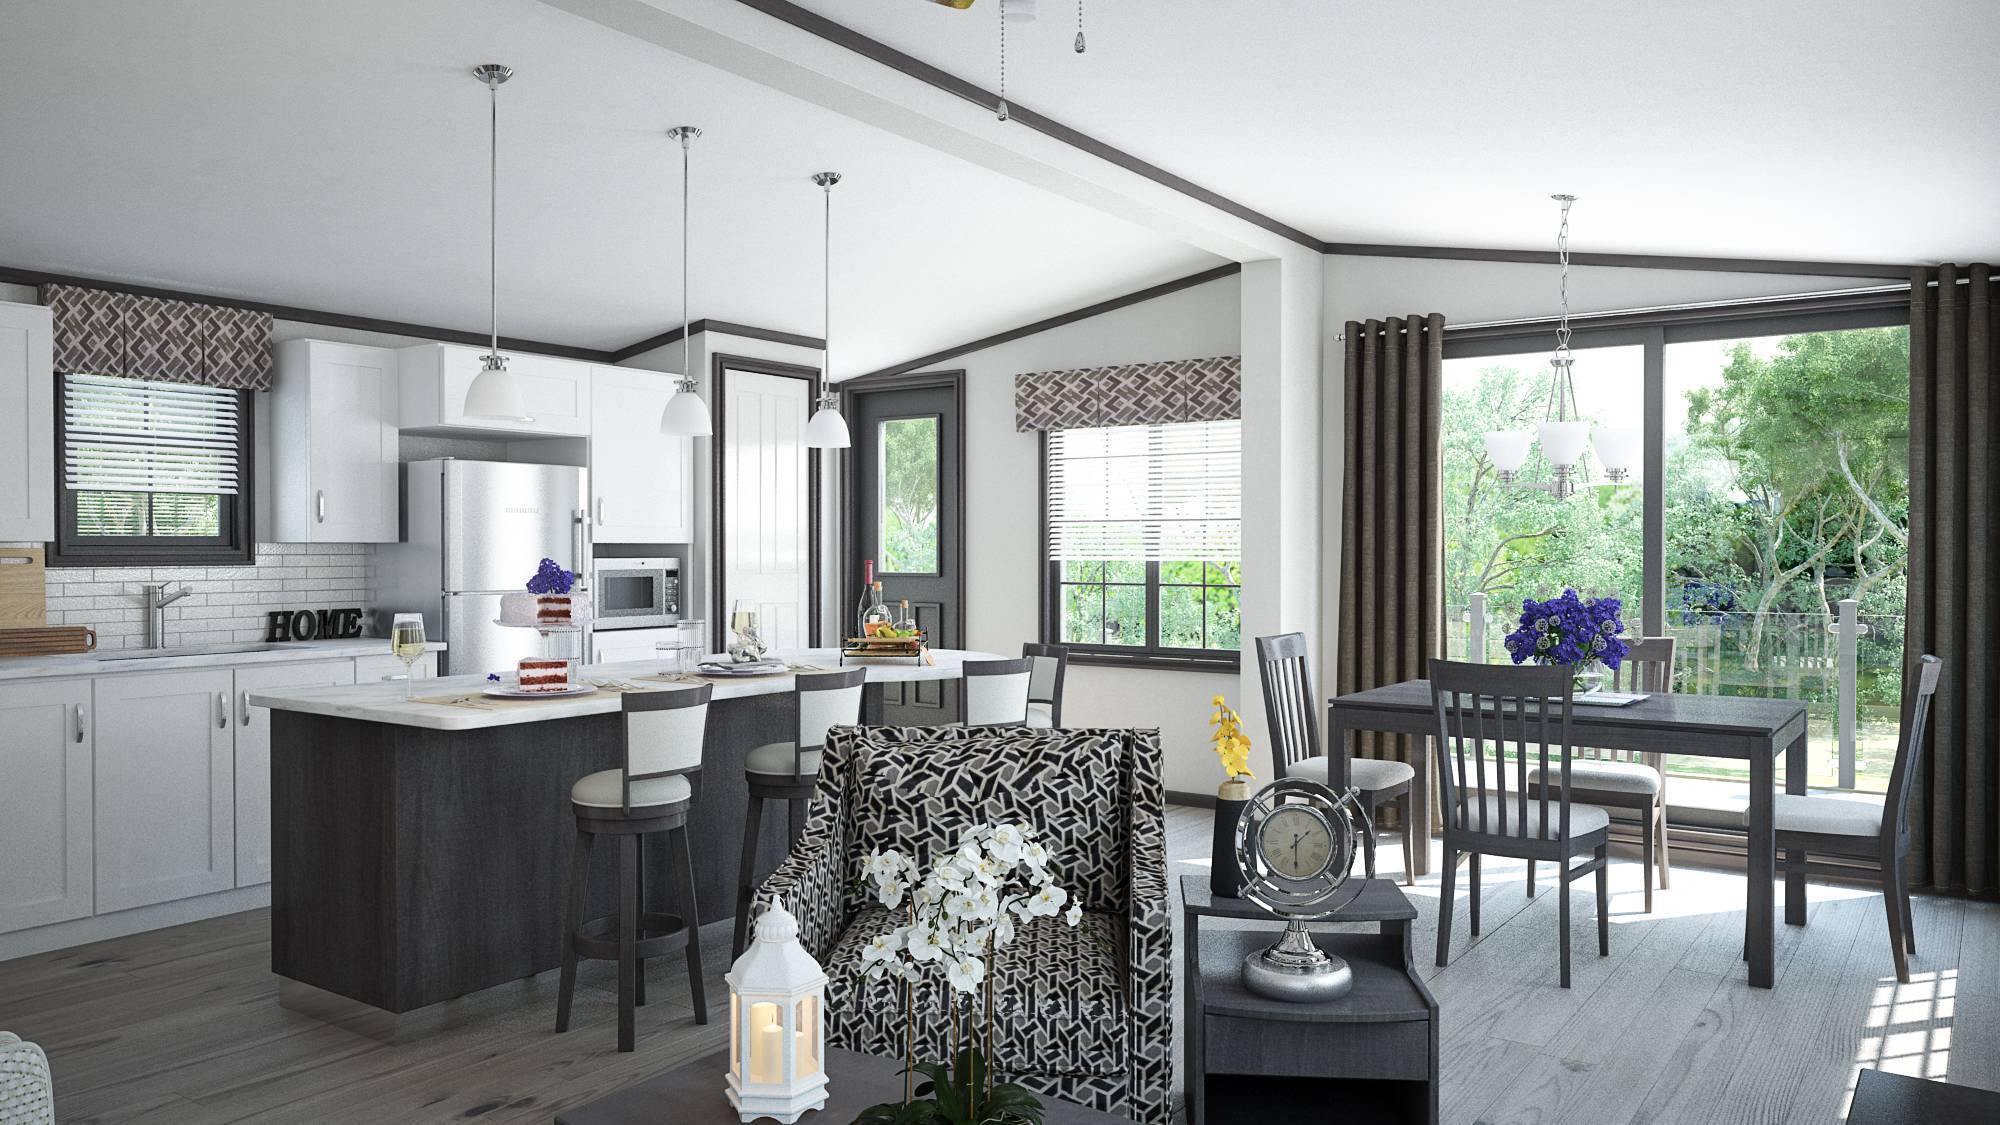 Interior Rendering of Kitchen/Dining Room Space.